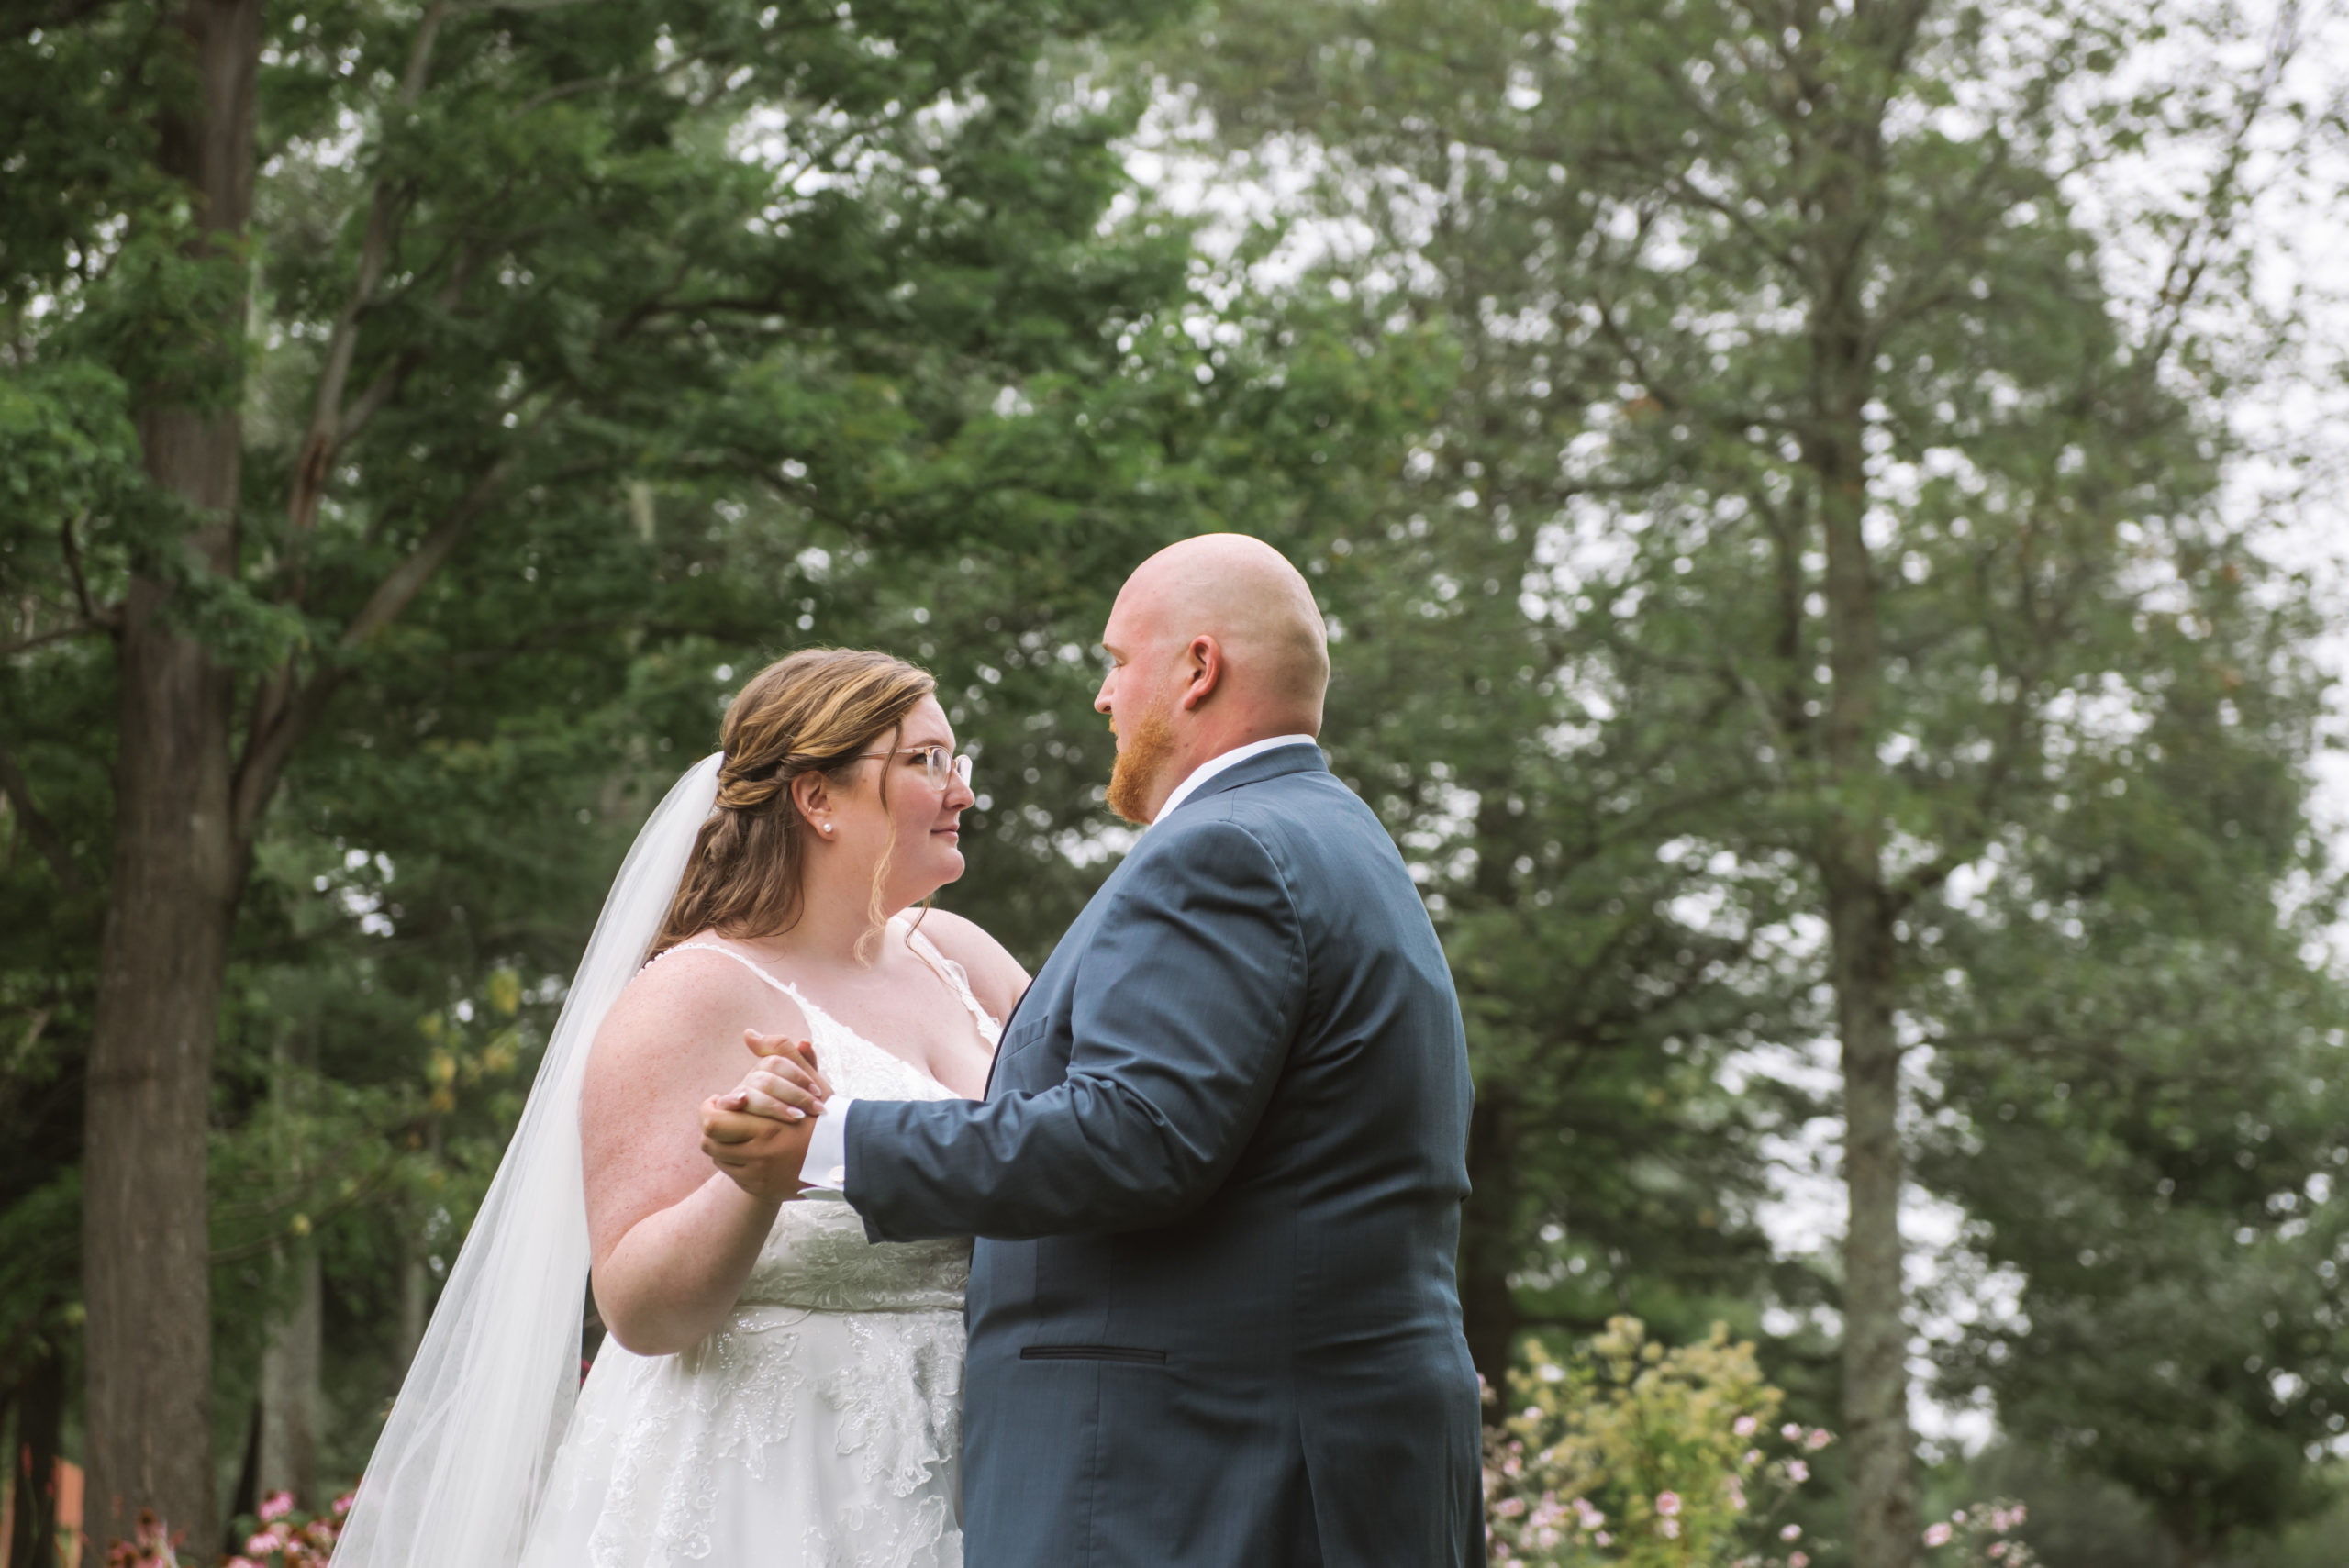 Bride and groom standing facing one another with their arms wrapped around each other and their hands in each other's hands in a slow dance. They are looking into each other's eyes. There are trees in the background.